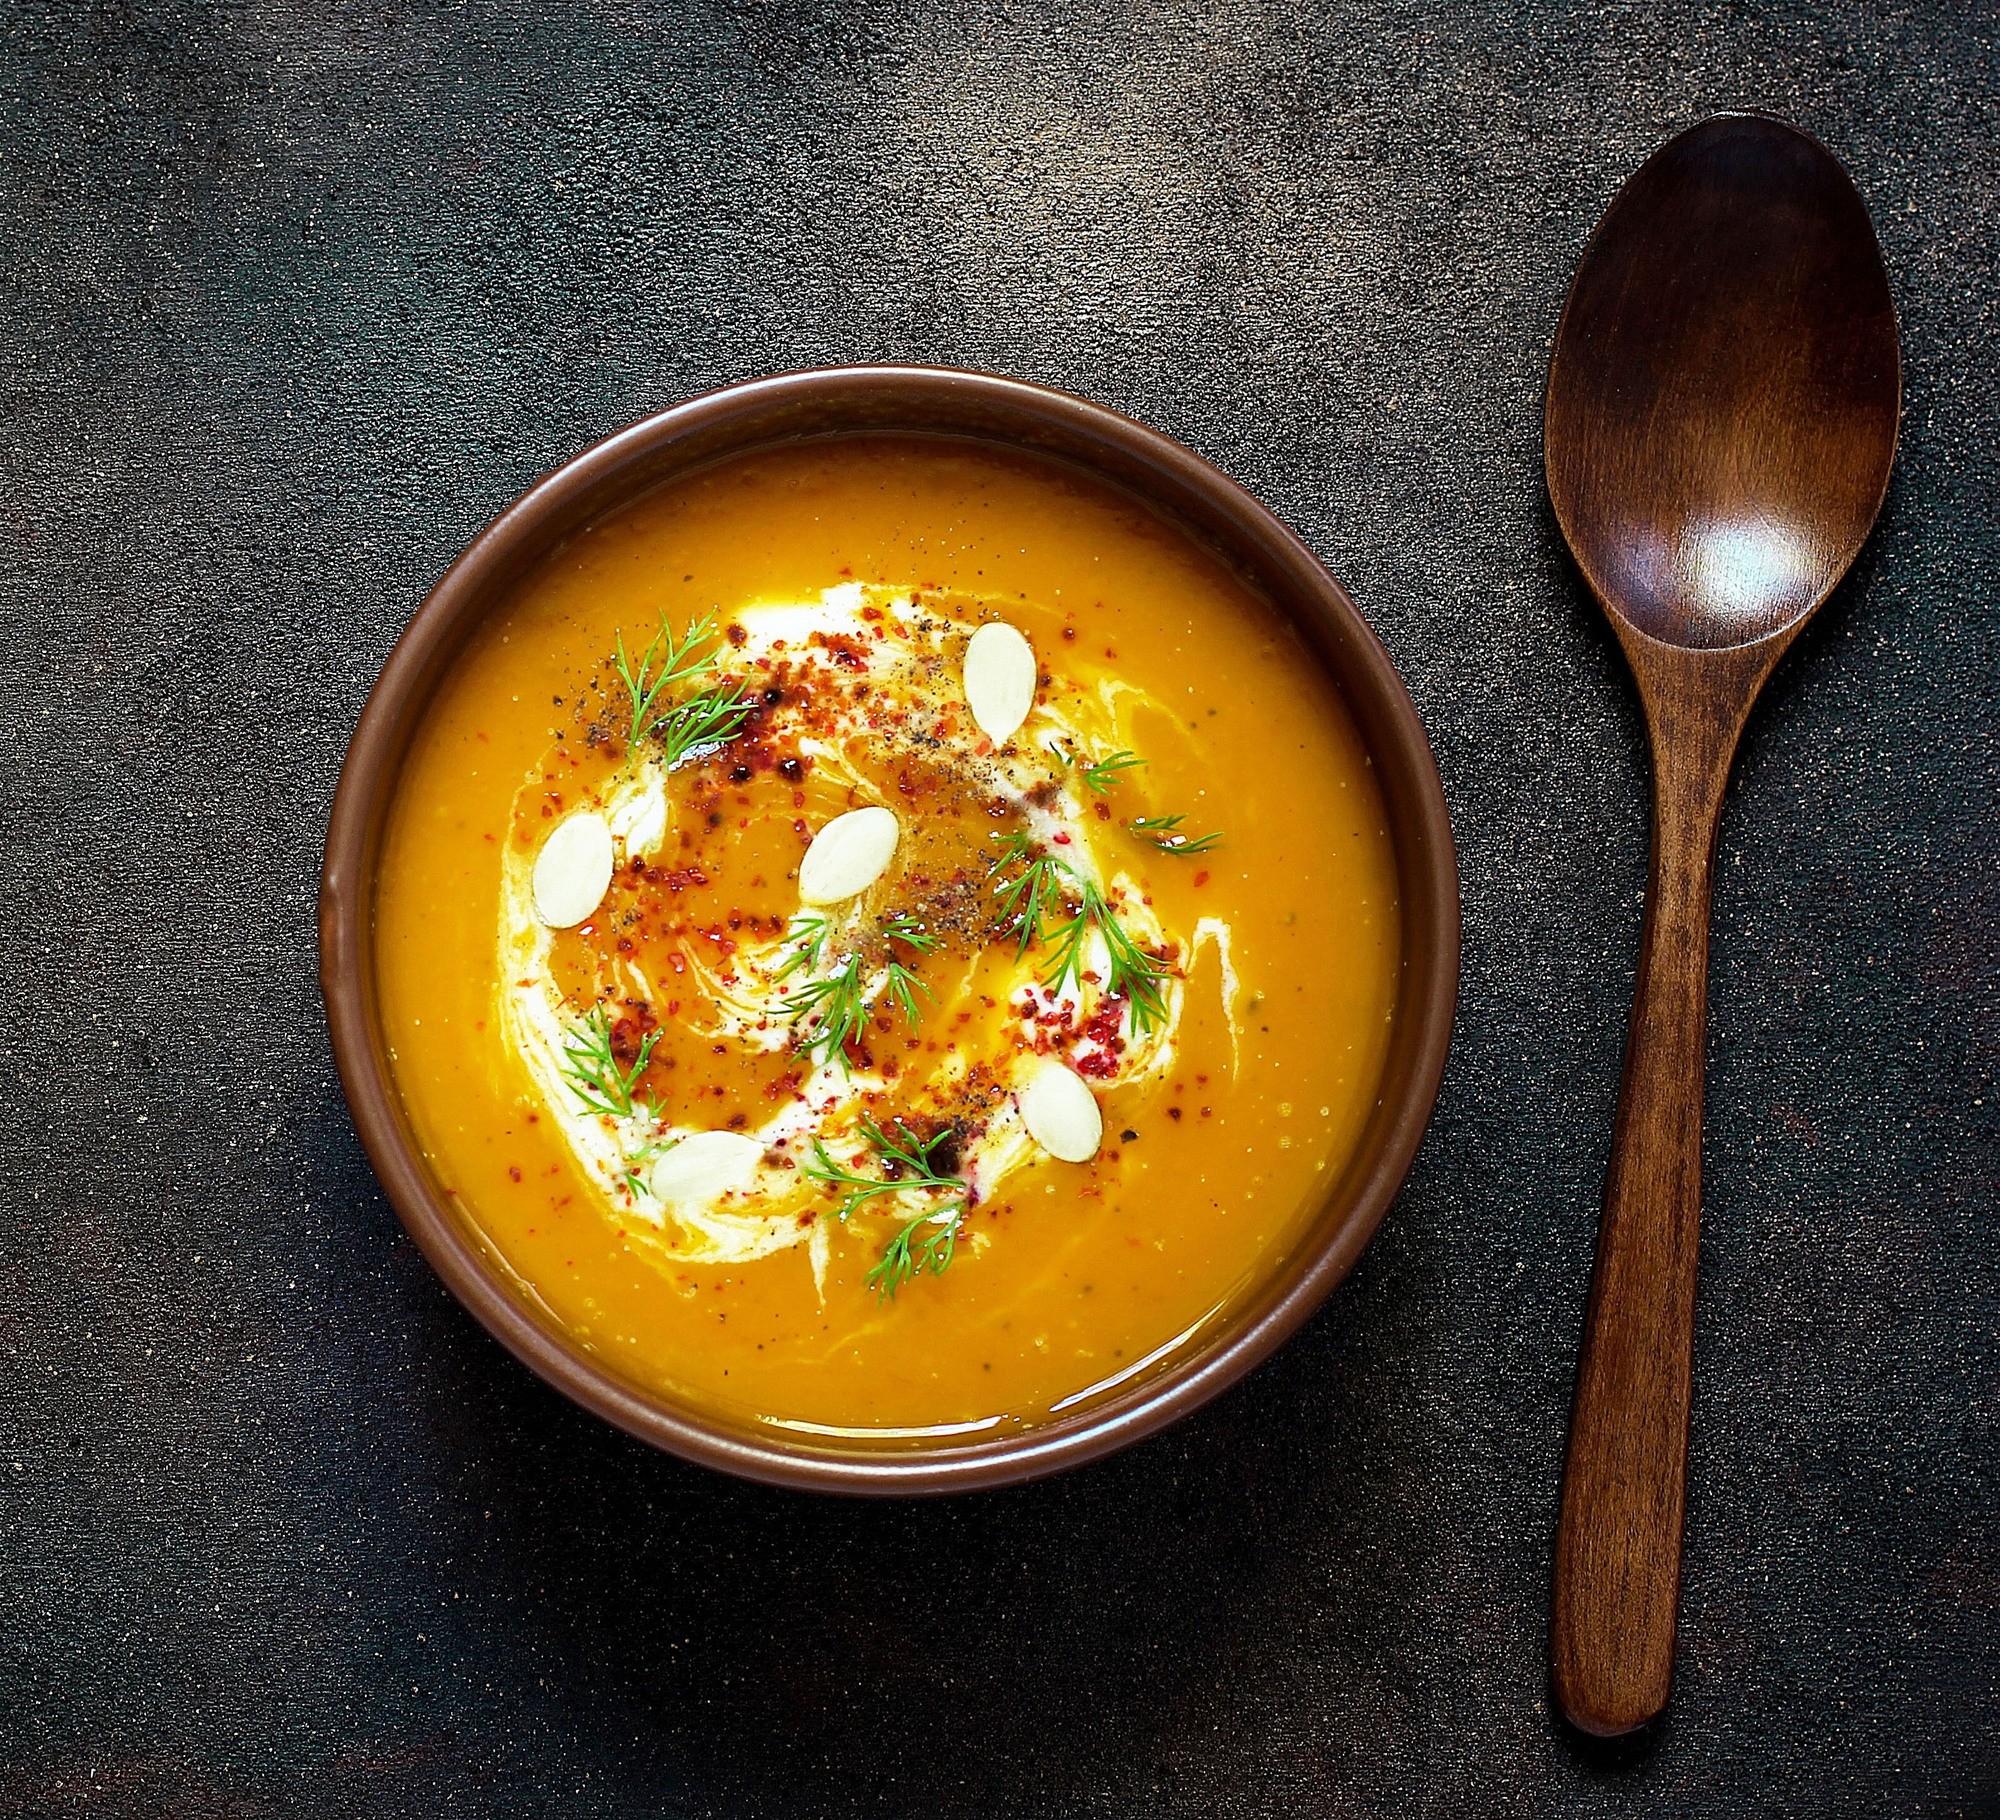 https://www.themaasclinic.com/wp-content/uploads/2020/11/Maas_Clinic_Curried_Carrot_Soup-scaled.jpg